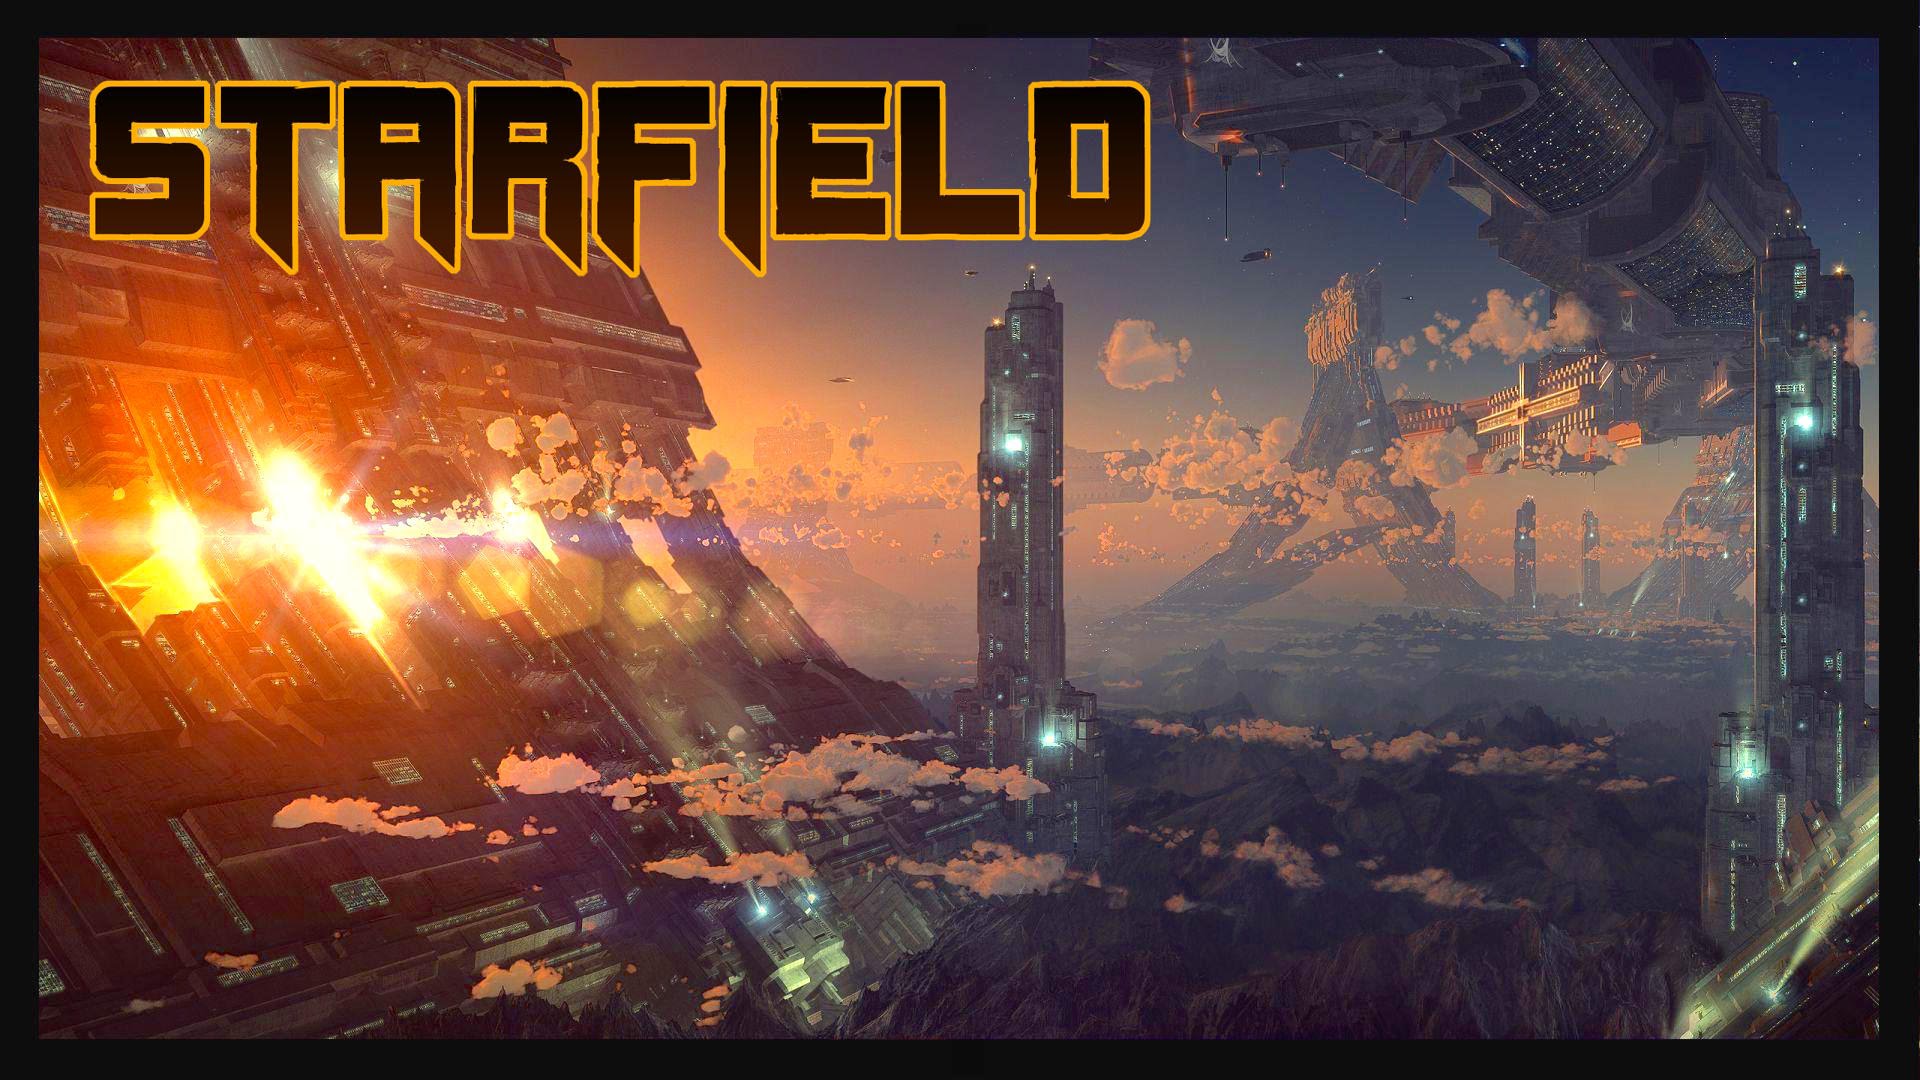 STARFIELD - A New Sci Fi Bethesda Game? - YouTube